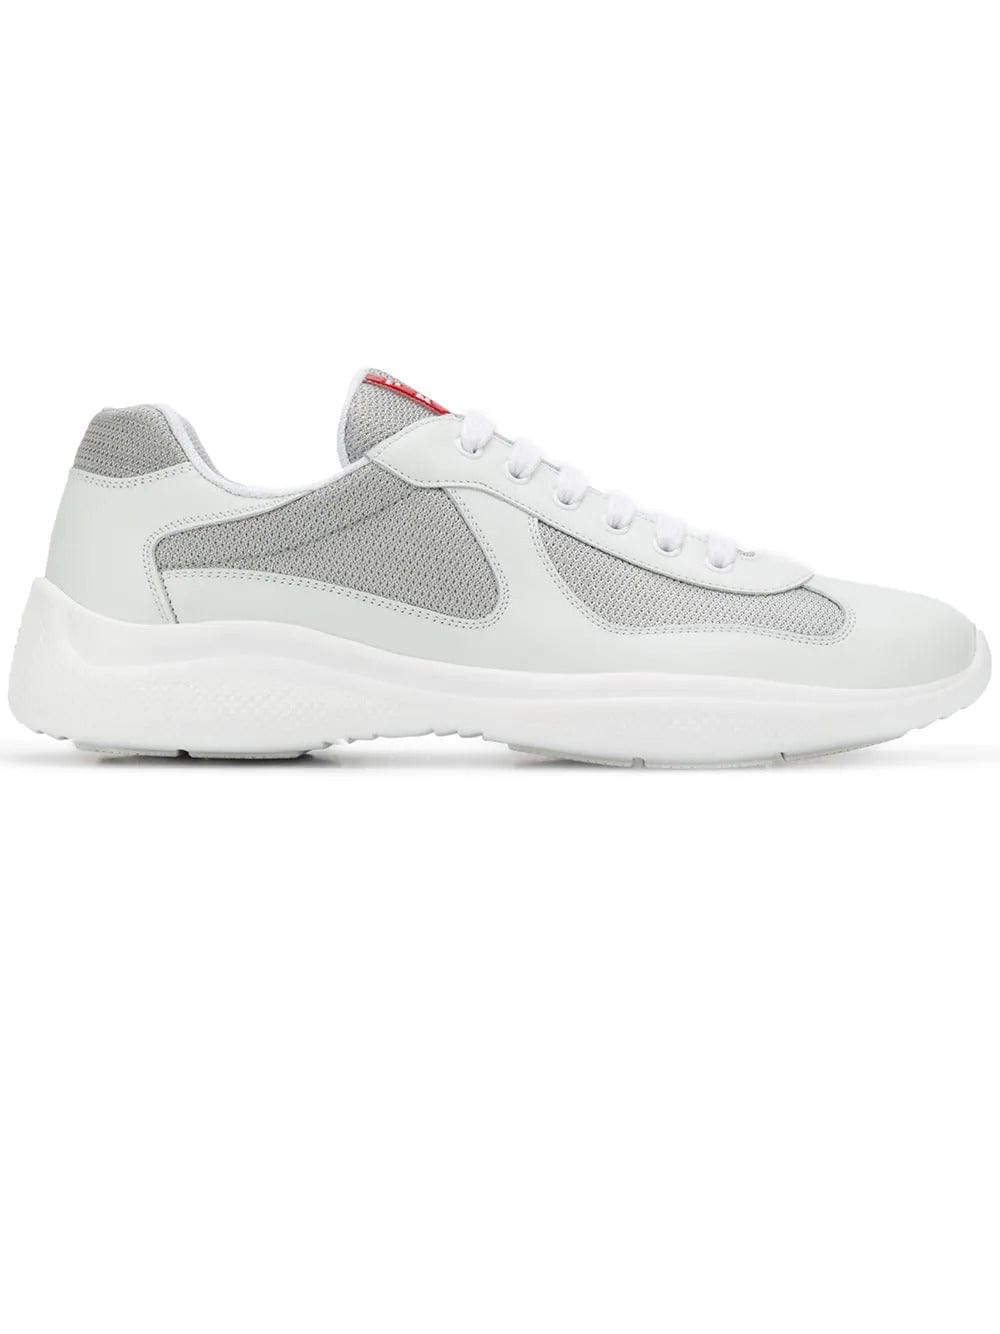 Prada America's Cup White Leather Sneakers – Aztec Clothing